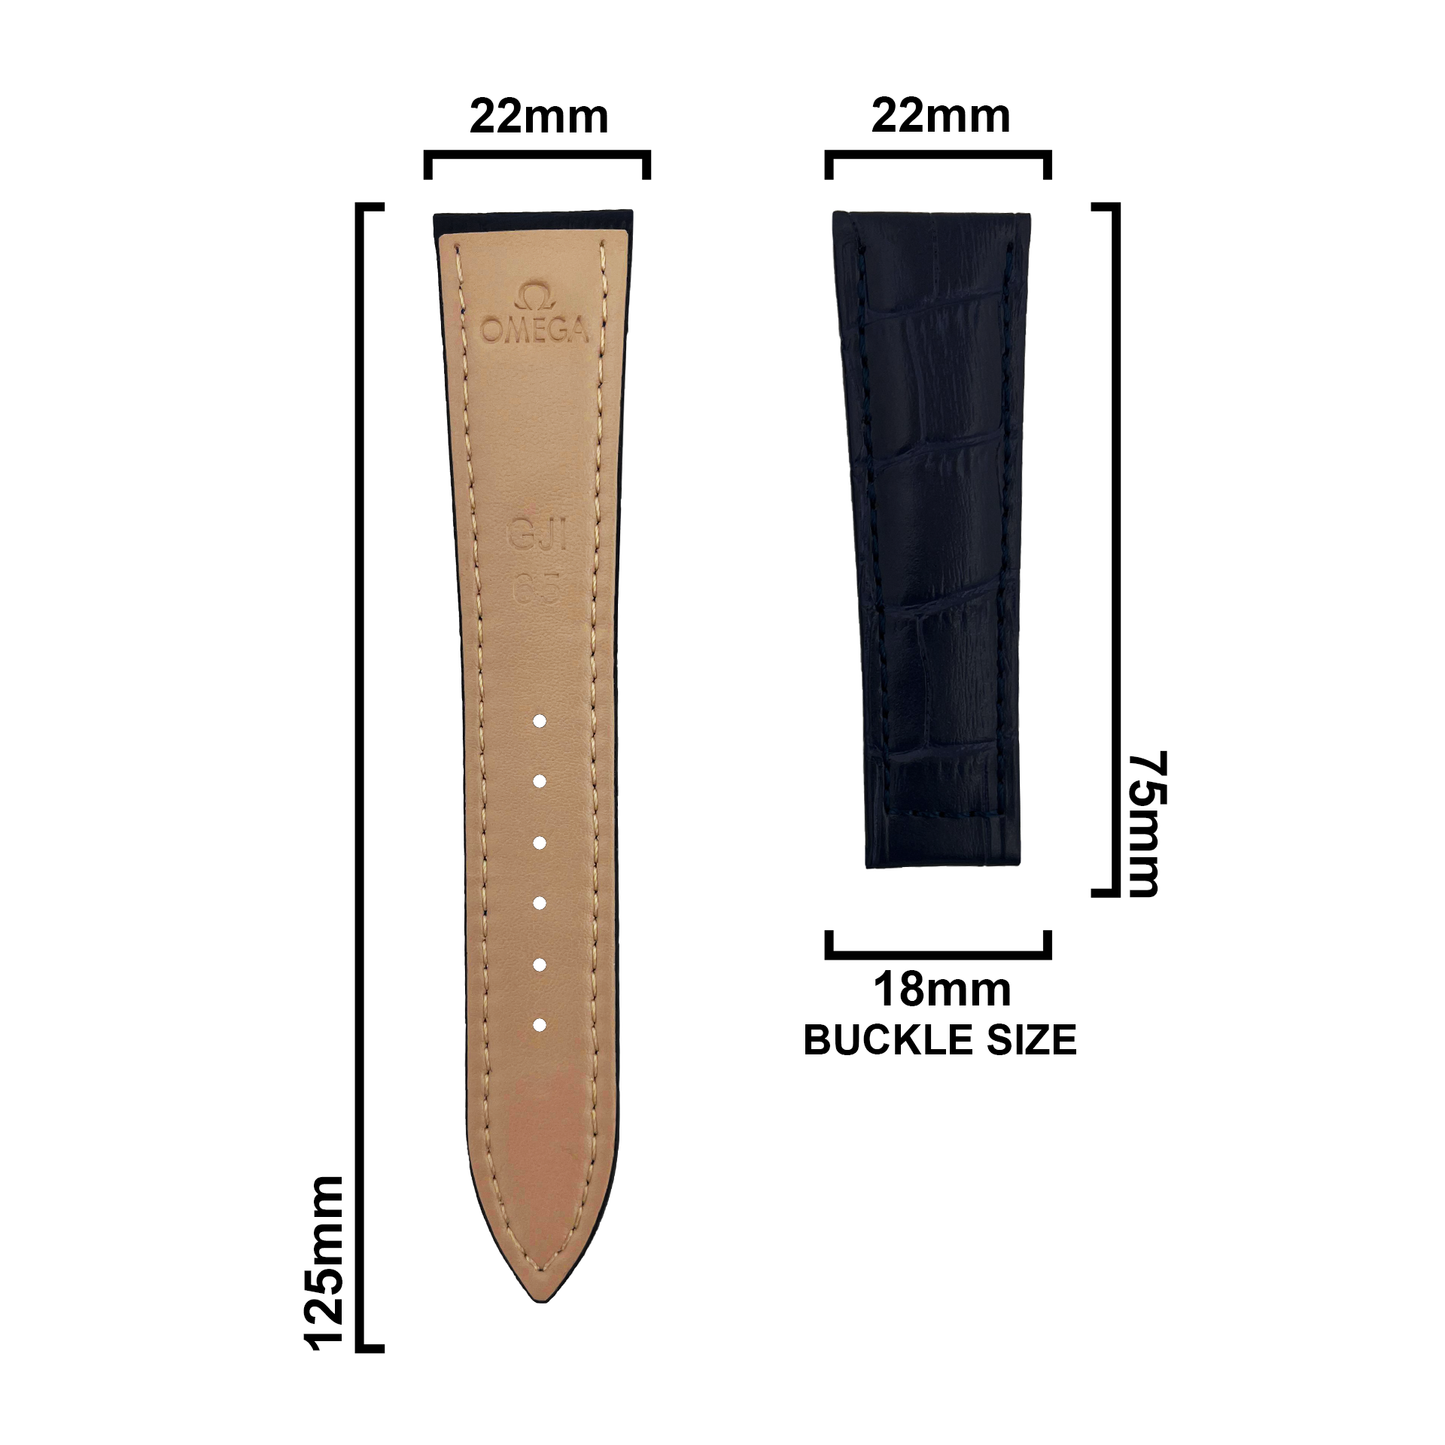 DBLACK [OMGDS1] 22MM LEATHER WATCH STRAP // COMPATIBLE FOR "OMEGA" WATCH MODELS